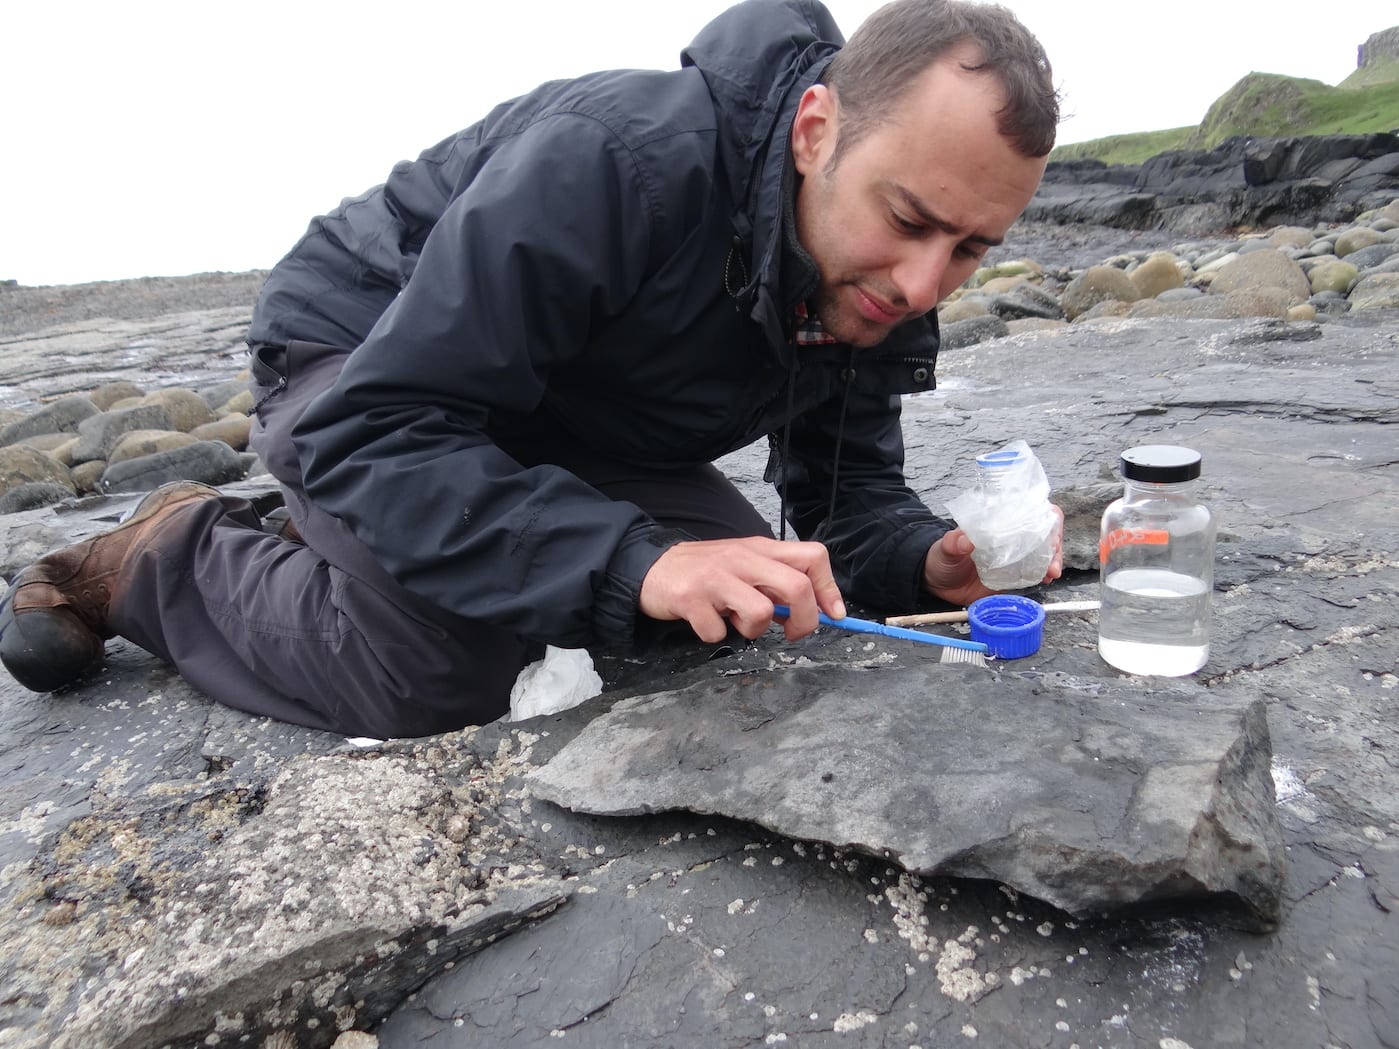 Steve Brusatte, who teaches in the School of GeoSciences at the University of Edinburgh, Scotland, collecting Jurassic-age fossils on Skye island in Scotland